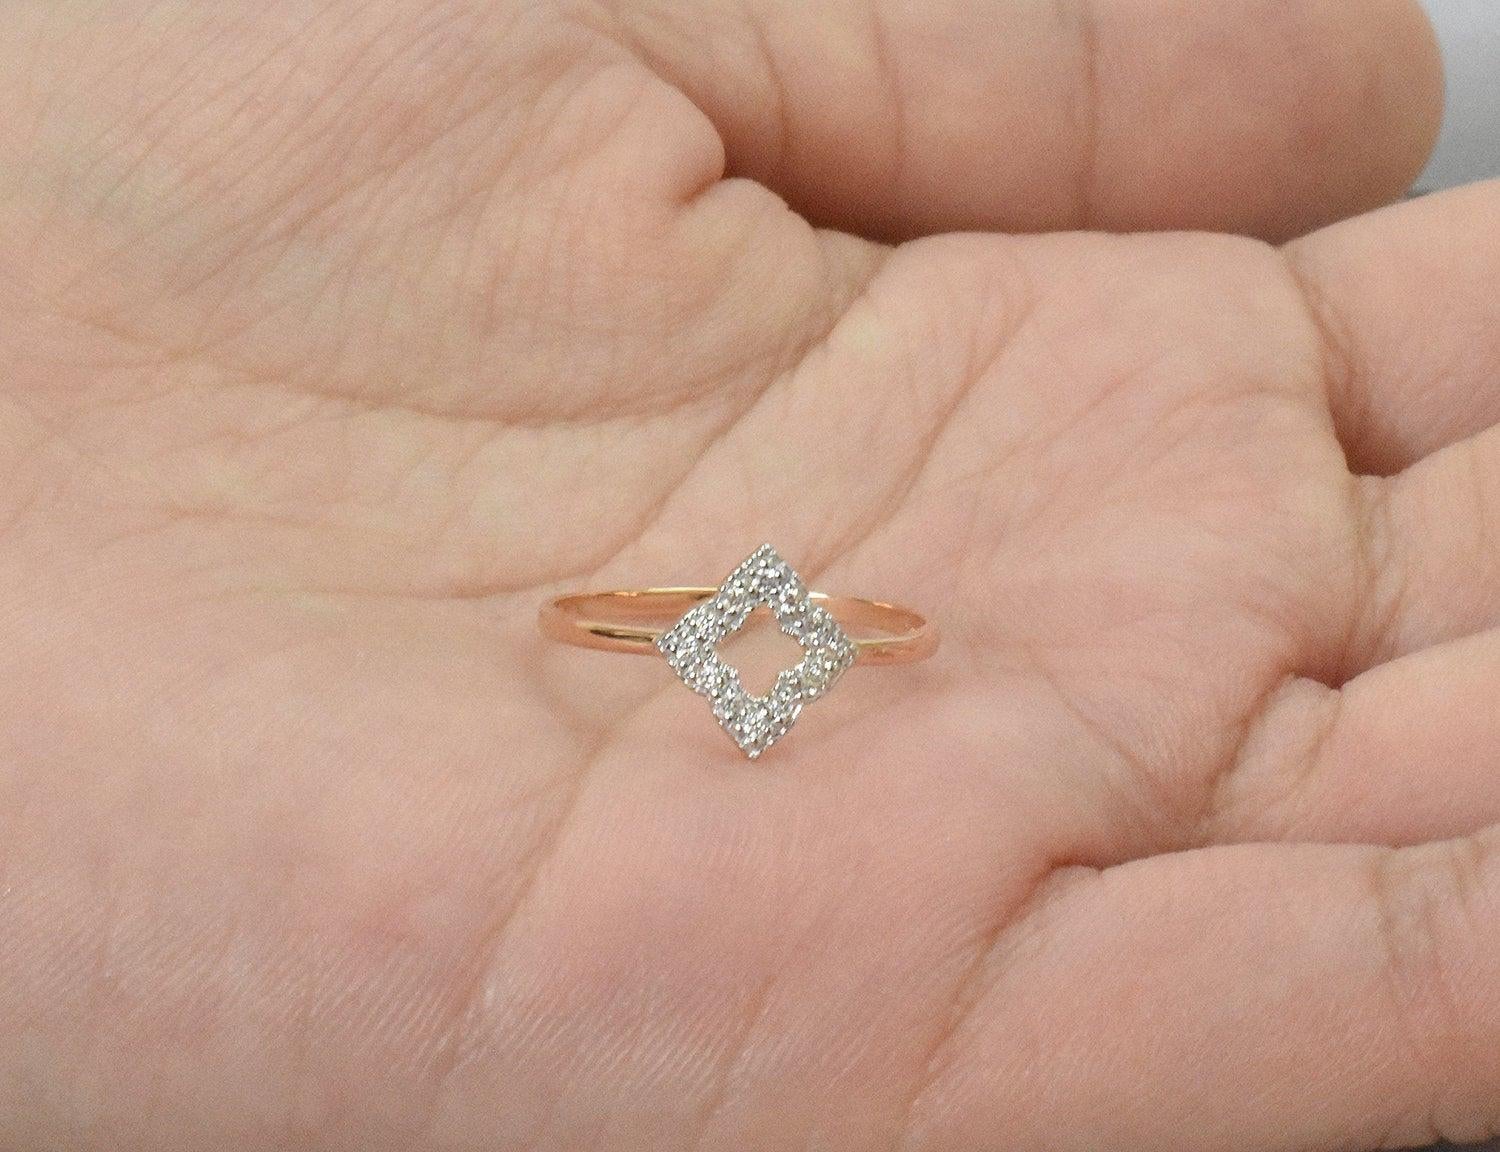 For Sale:  14k Gold Diamond Clover Ring Engagement Ring Stackable Diamond Ring 8